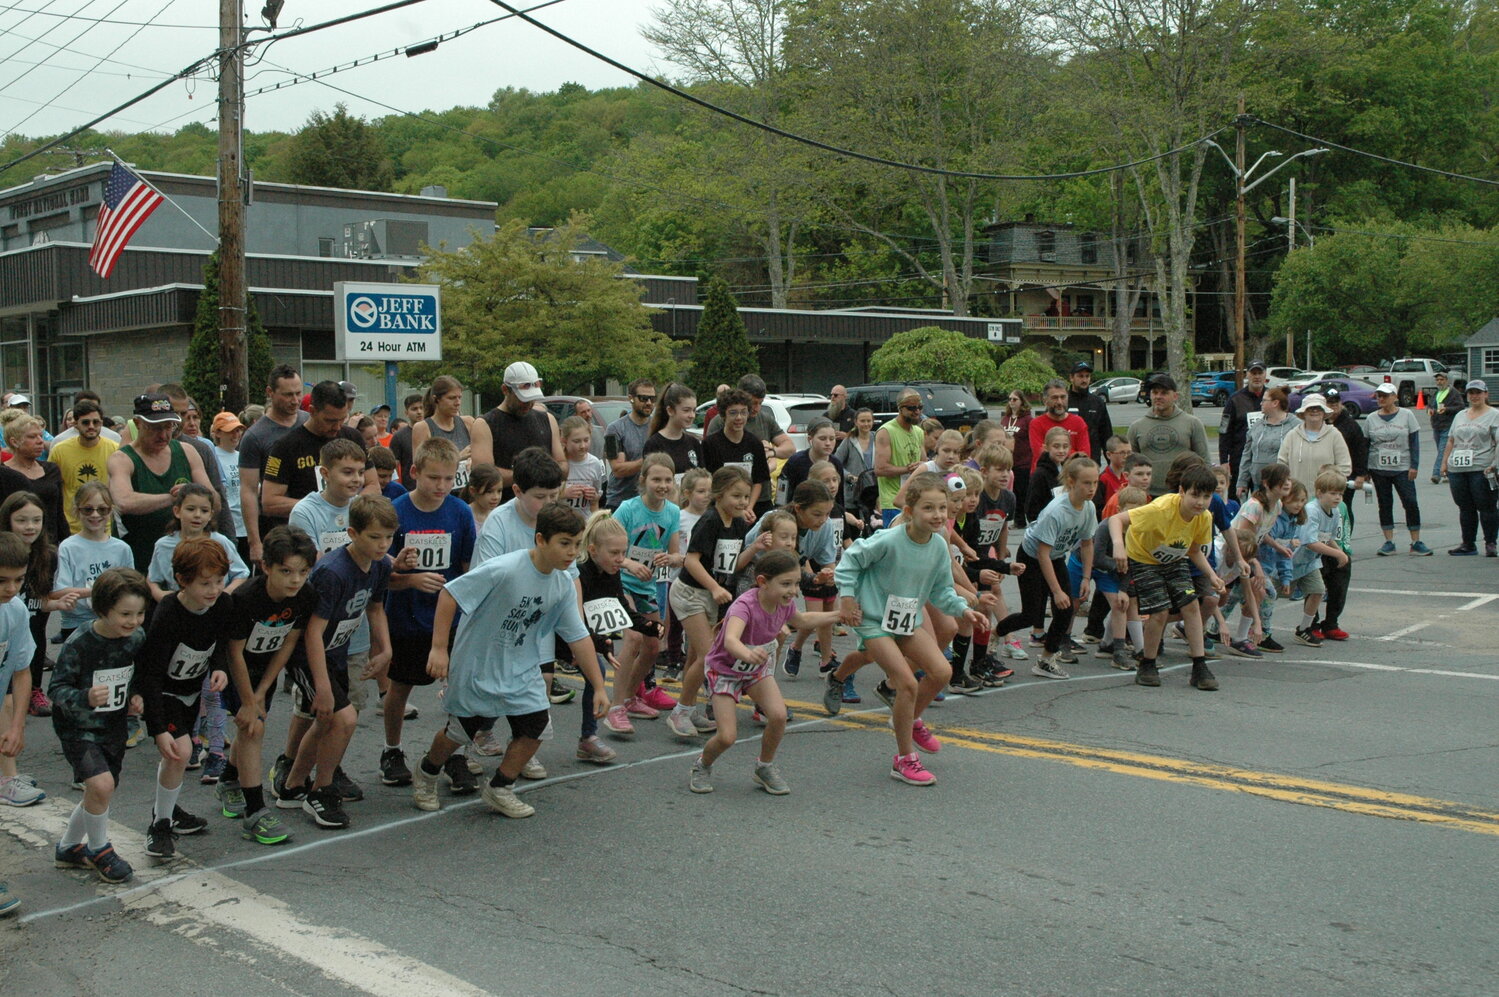 Led by Sullivan West students, runners of the 2023 5K Sap Run get off the start line on Main Street in Jeffersonville. This year’s race took place on Saturday, May 20 and was dedicated to John McCormack in his fight against ALS.